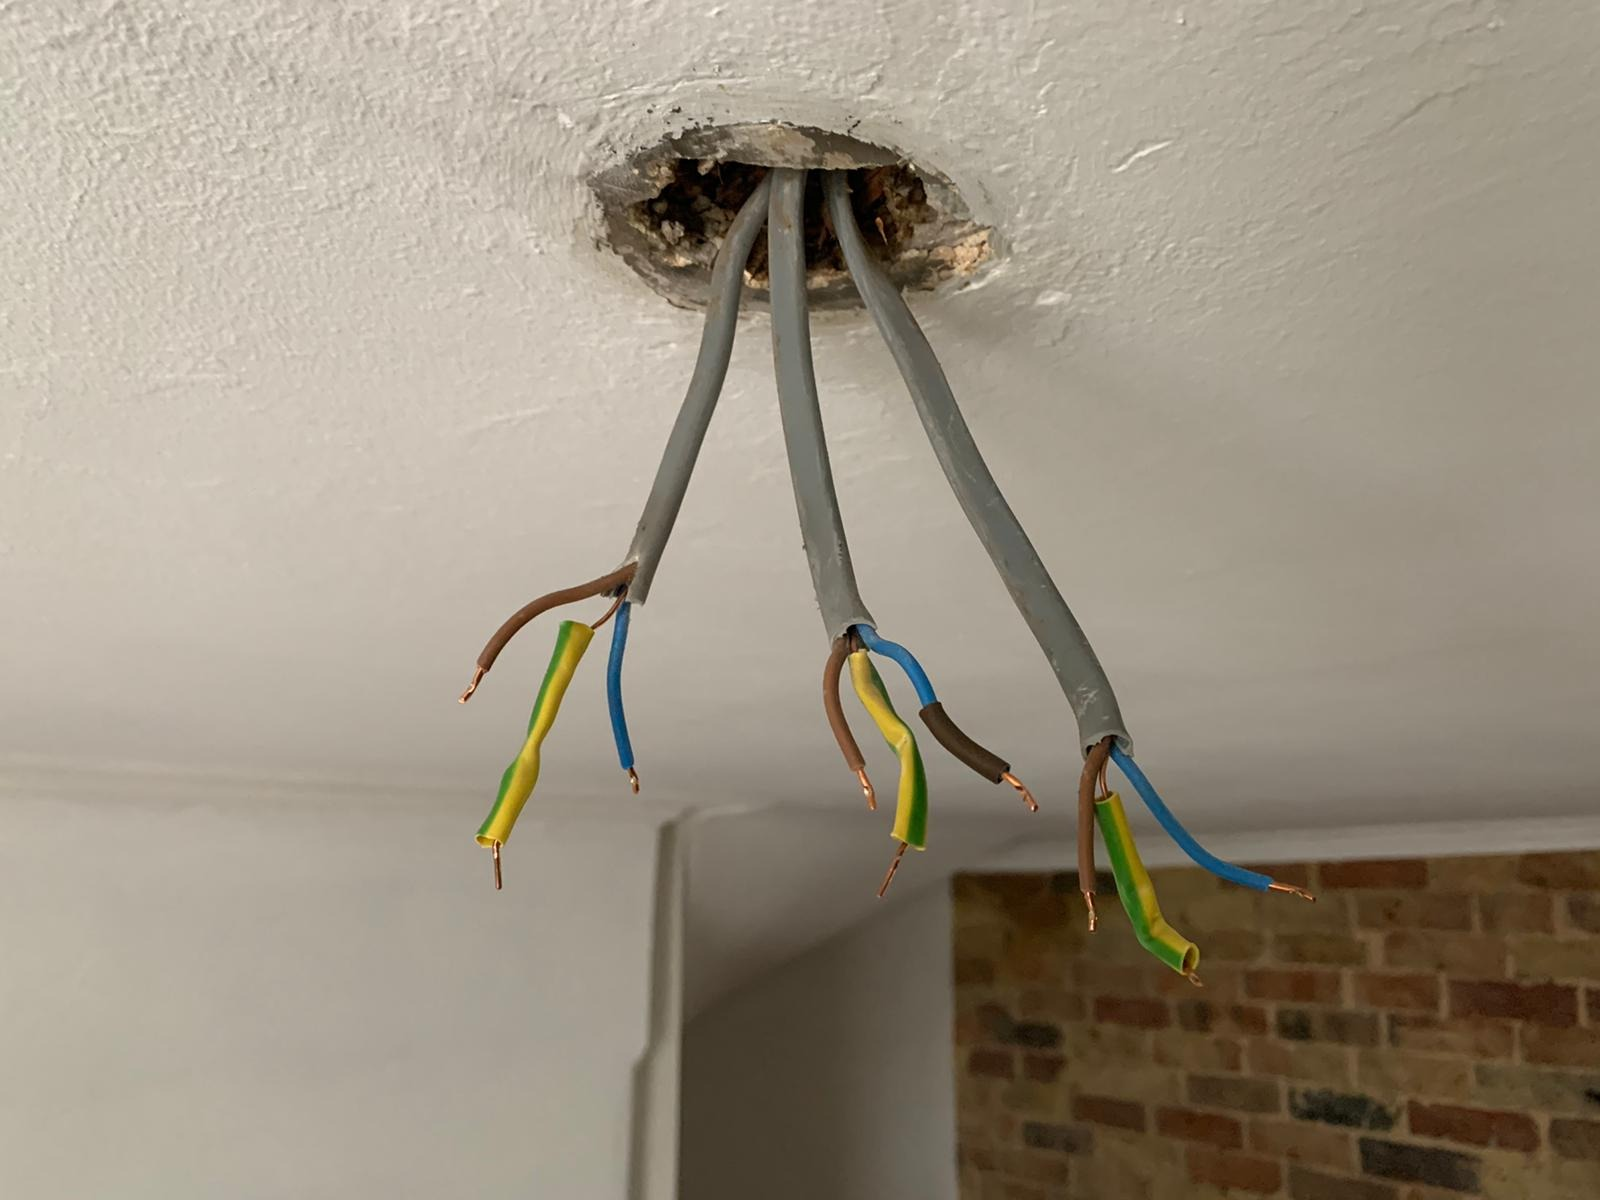 Help please! 2 wire sets in mounting box, 1 set on new light